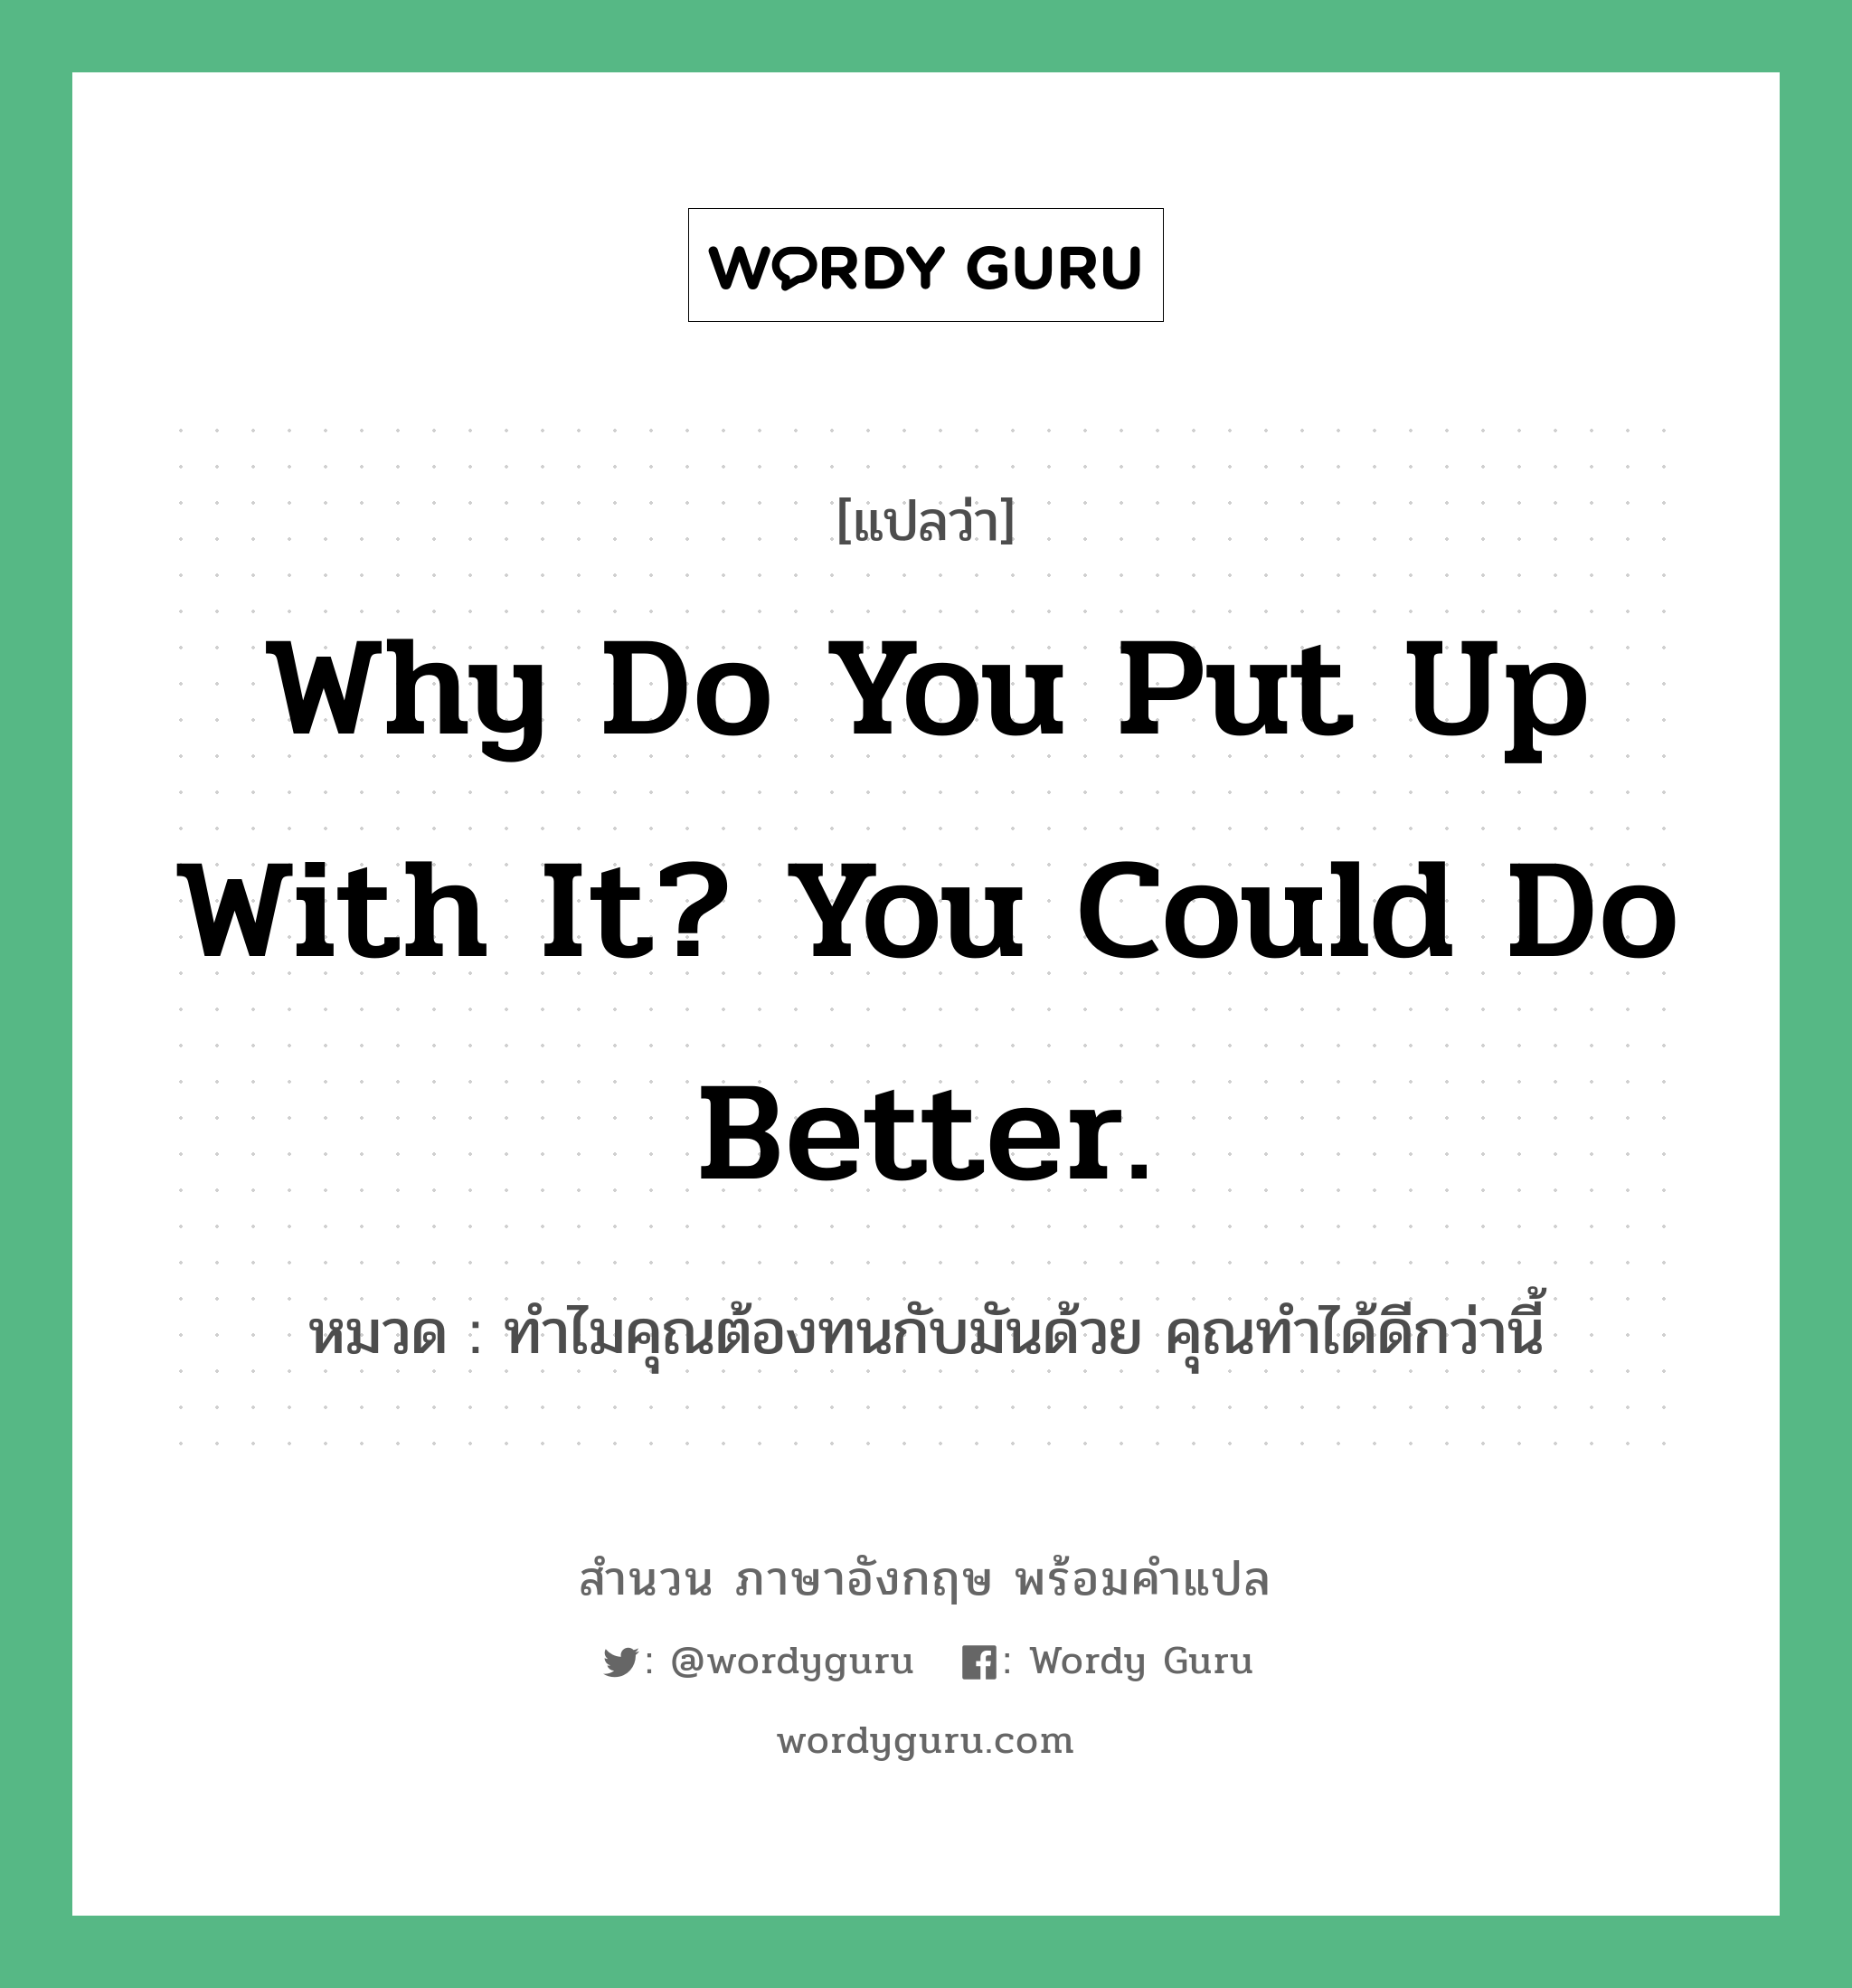 Why do you put up with it? You could do better. แปลว่า?, สำนวนภาษาอังกฤษ Why do you put up with it? You could do better. หมวด ทำไมคุณต้องทนกับมันด้วย คุณทำได้ดีกว่านี้